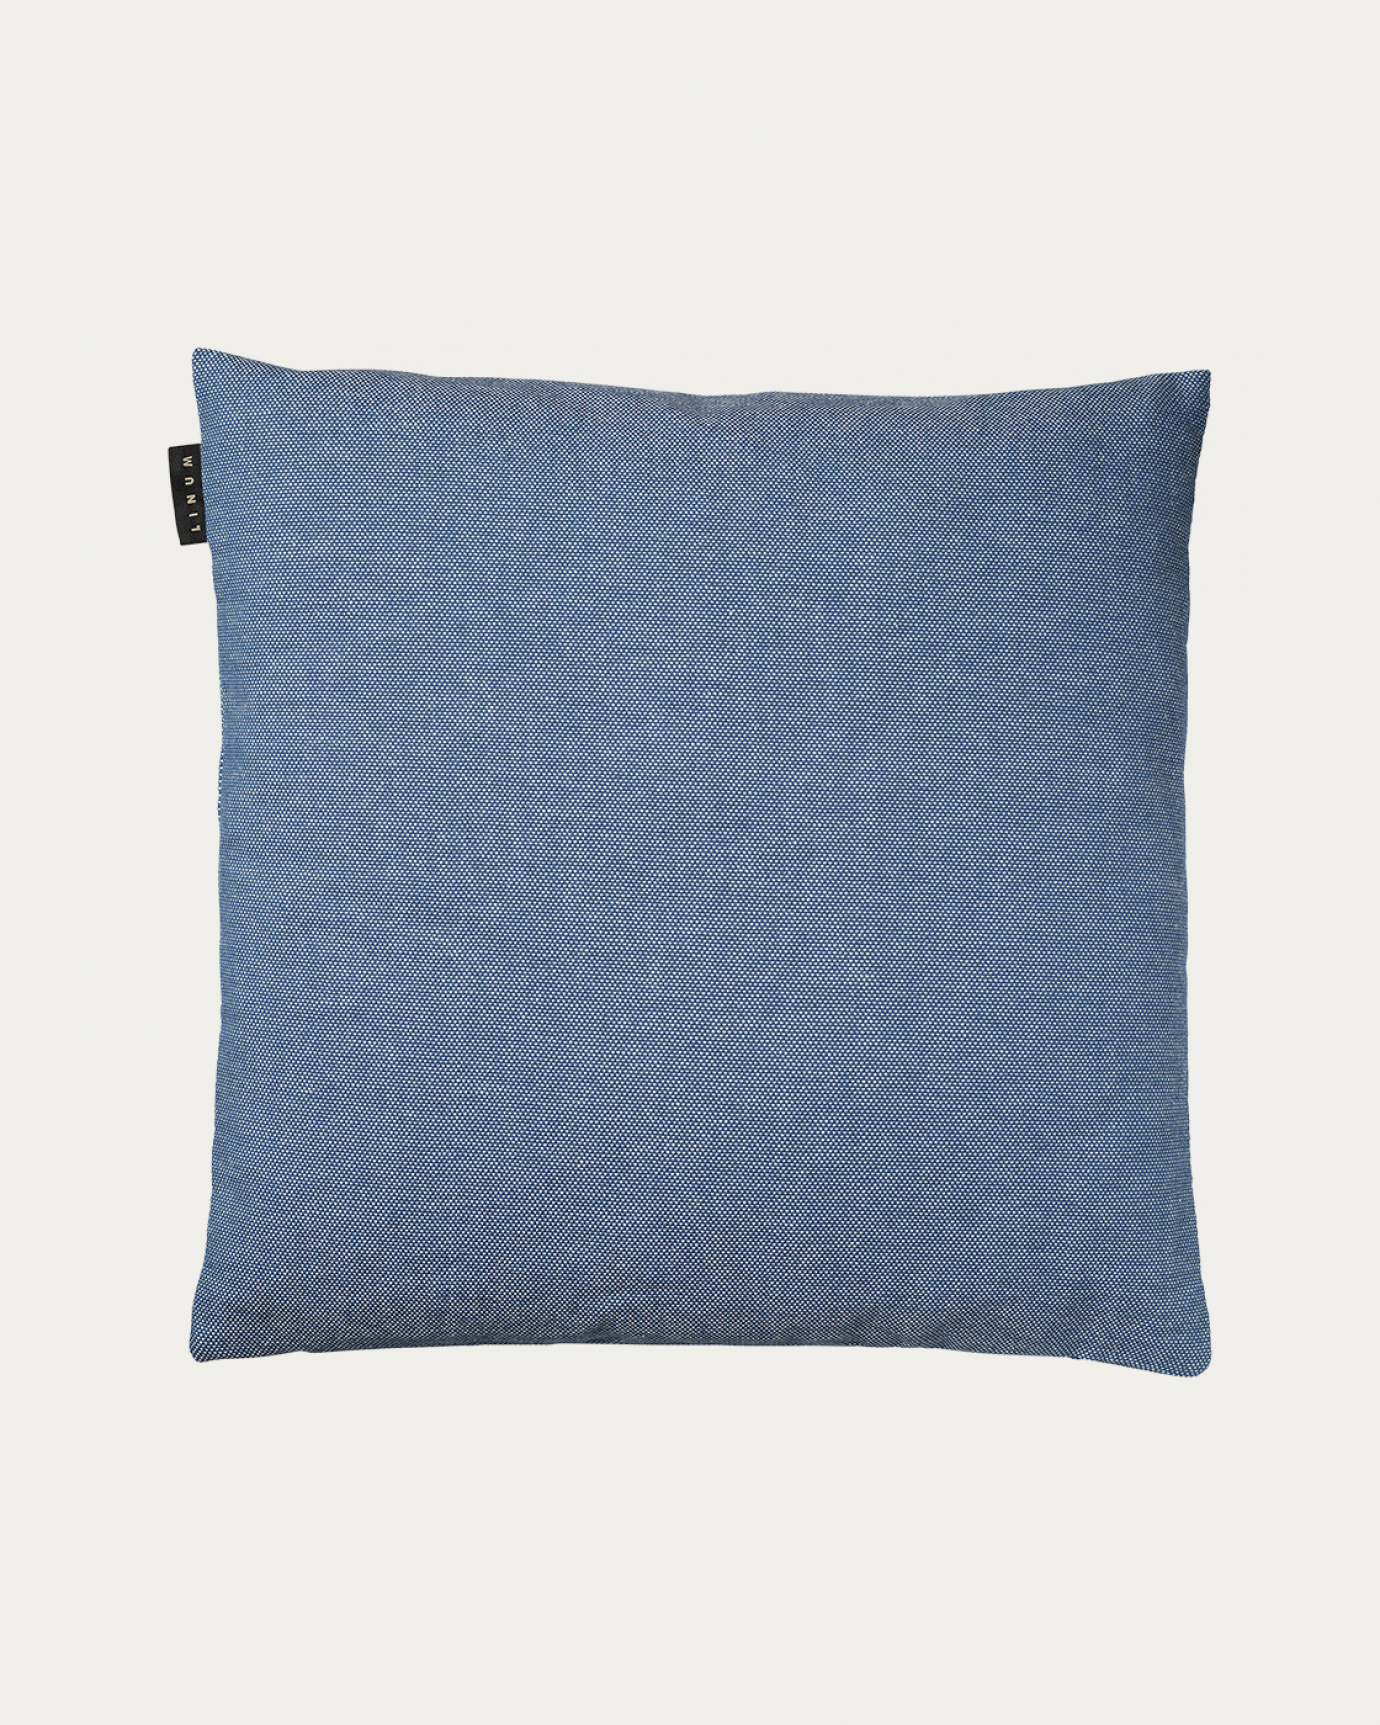 PEPPER Cushion cover 50x50 cm Deep sea blue in the group ASSORTMENT / STANDARD / Cushion covers at LINUM DESIGN (23PEP05000C42)